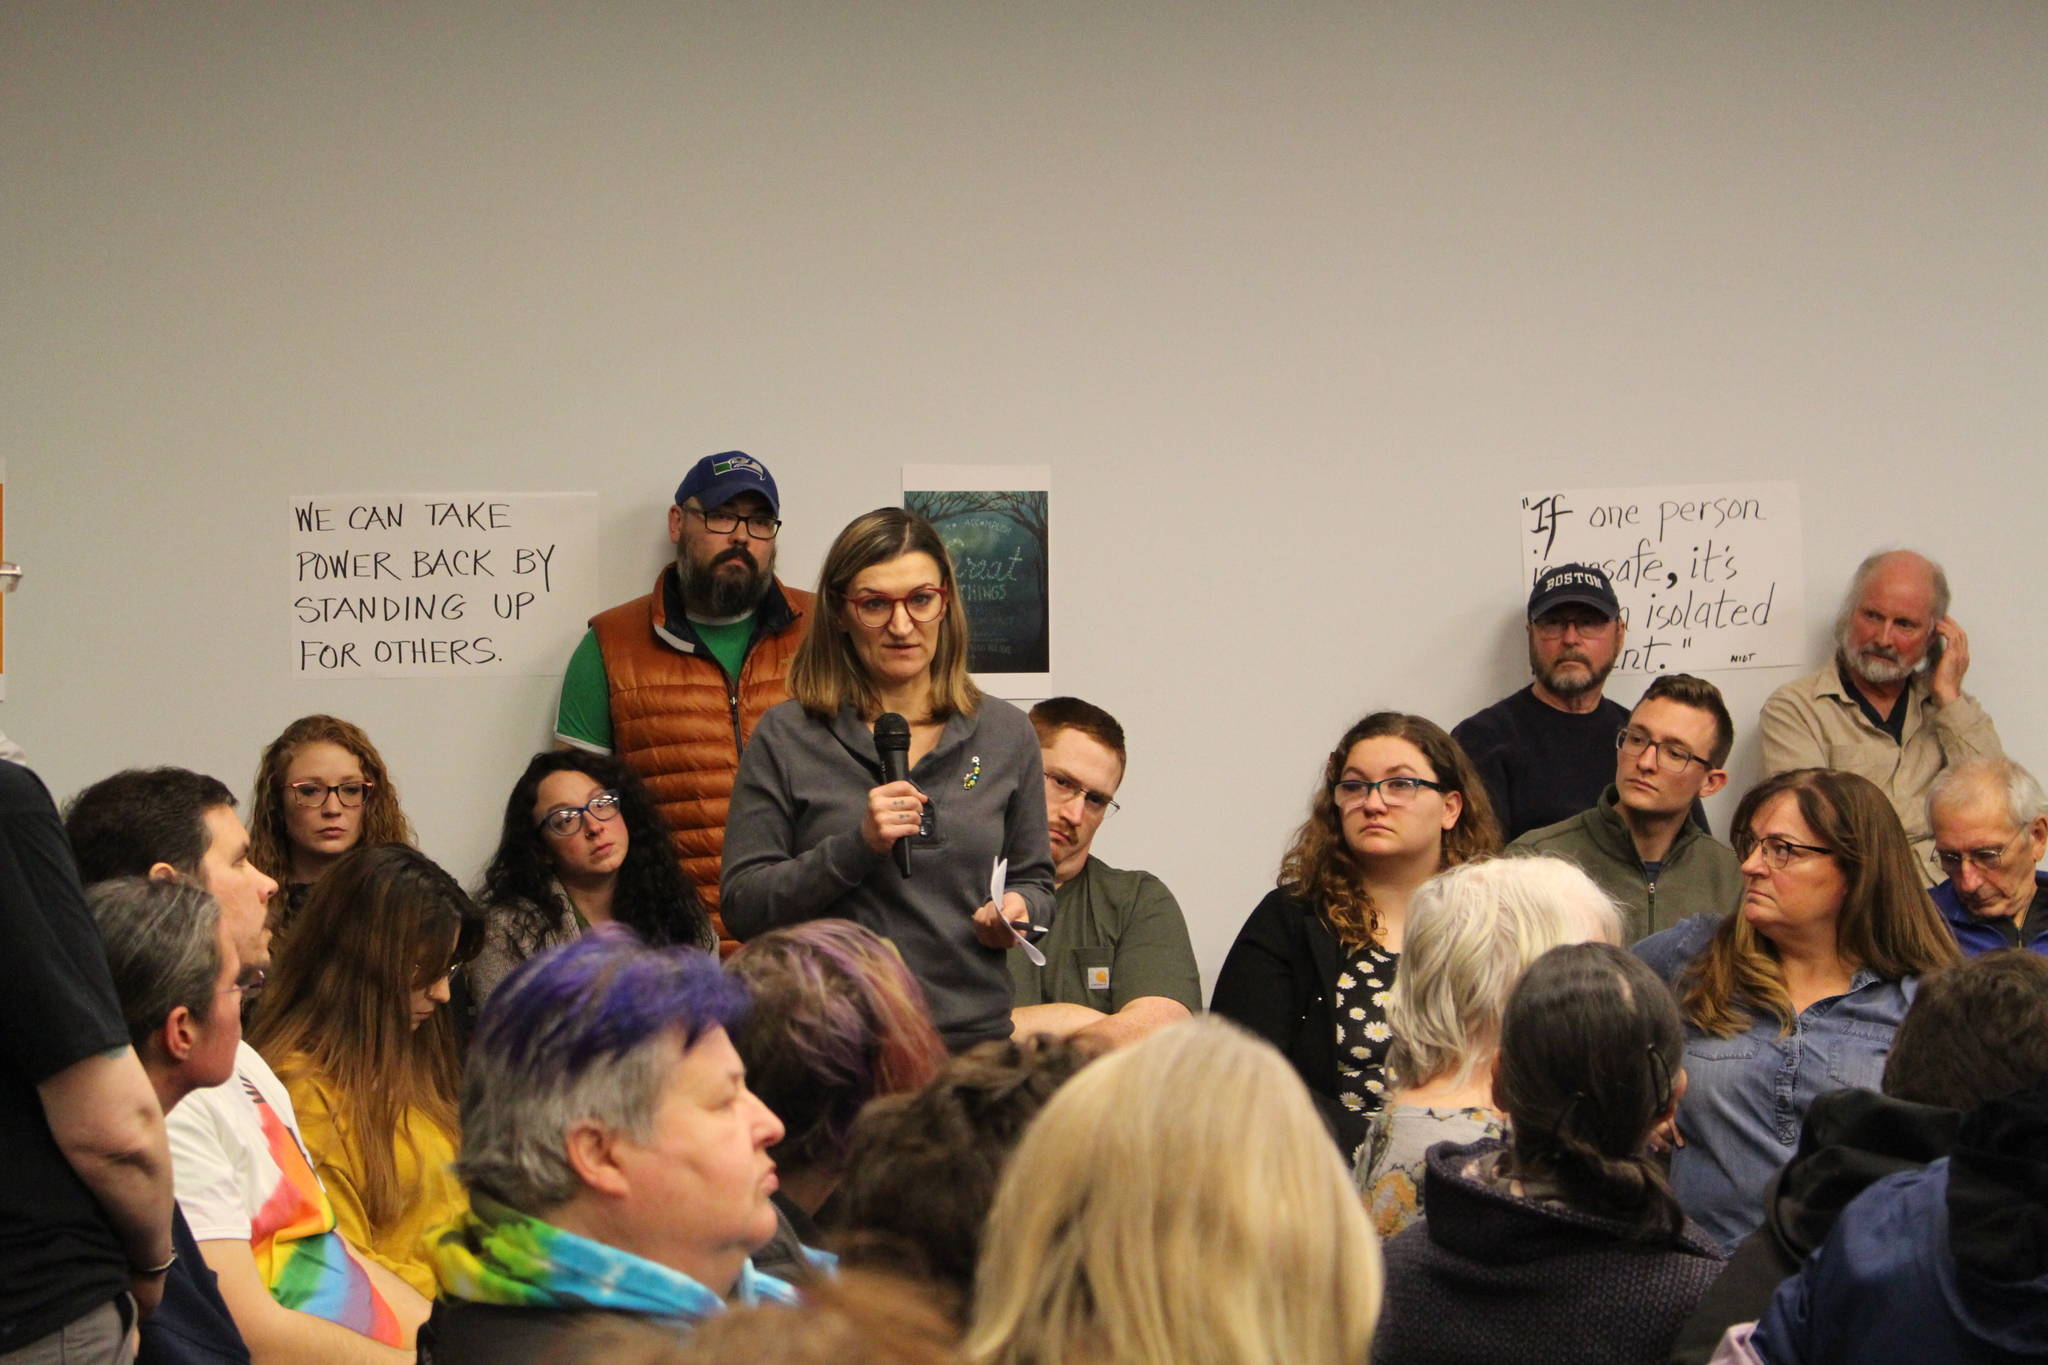 Audre Gifford asks Sen. Peter Micciche, R-Soldotna, to support SB82 during the LGBTQ Town Hall at the Soldotna Public Library in Soldotna, Alaska on Jan. 4, 2020. (Photo by Brian Mazurek/Peninsula Clarion)